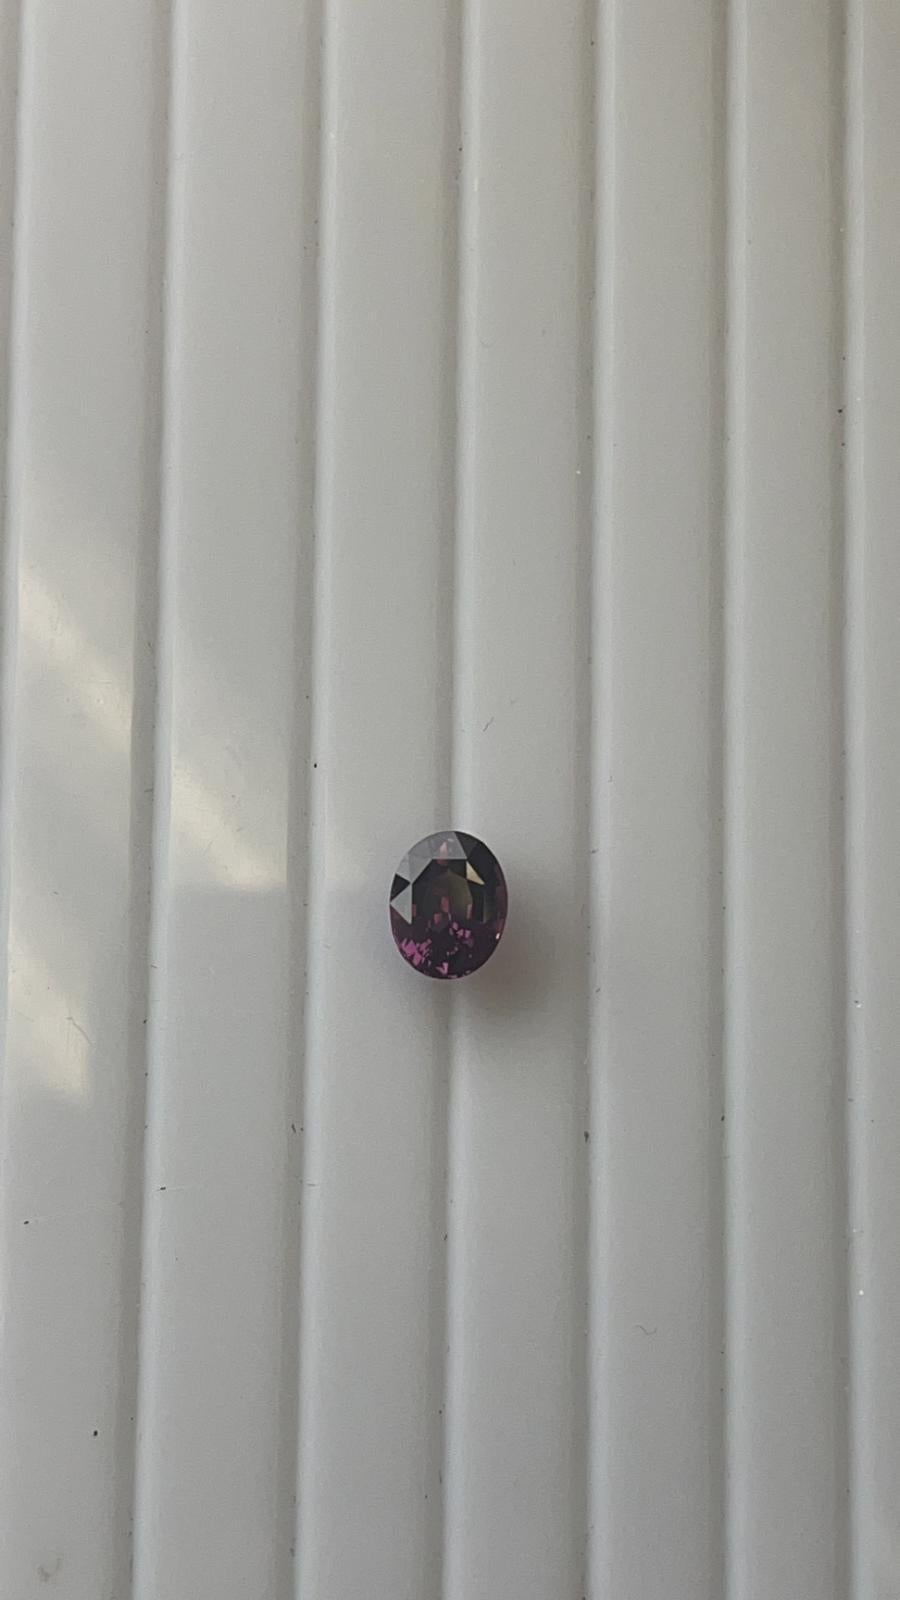 GIA Certified Oval Purplish Pink Sapphire weighing 3.08 carats
Measuring (9.55x7.58x5.22) mm
No indications of heating
